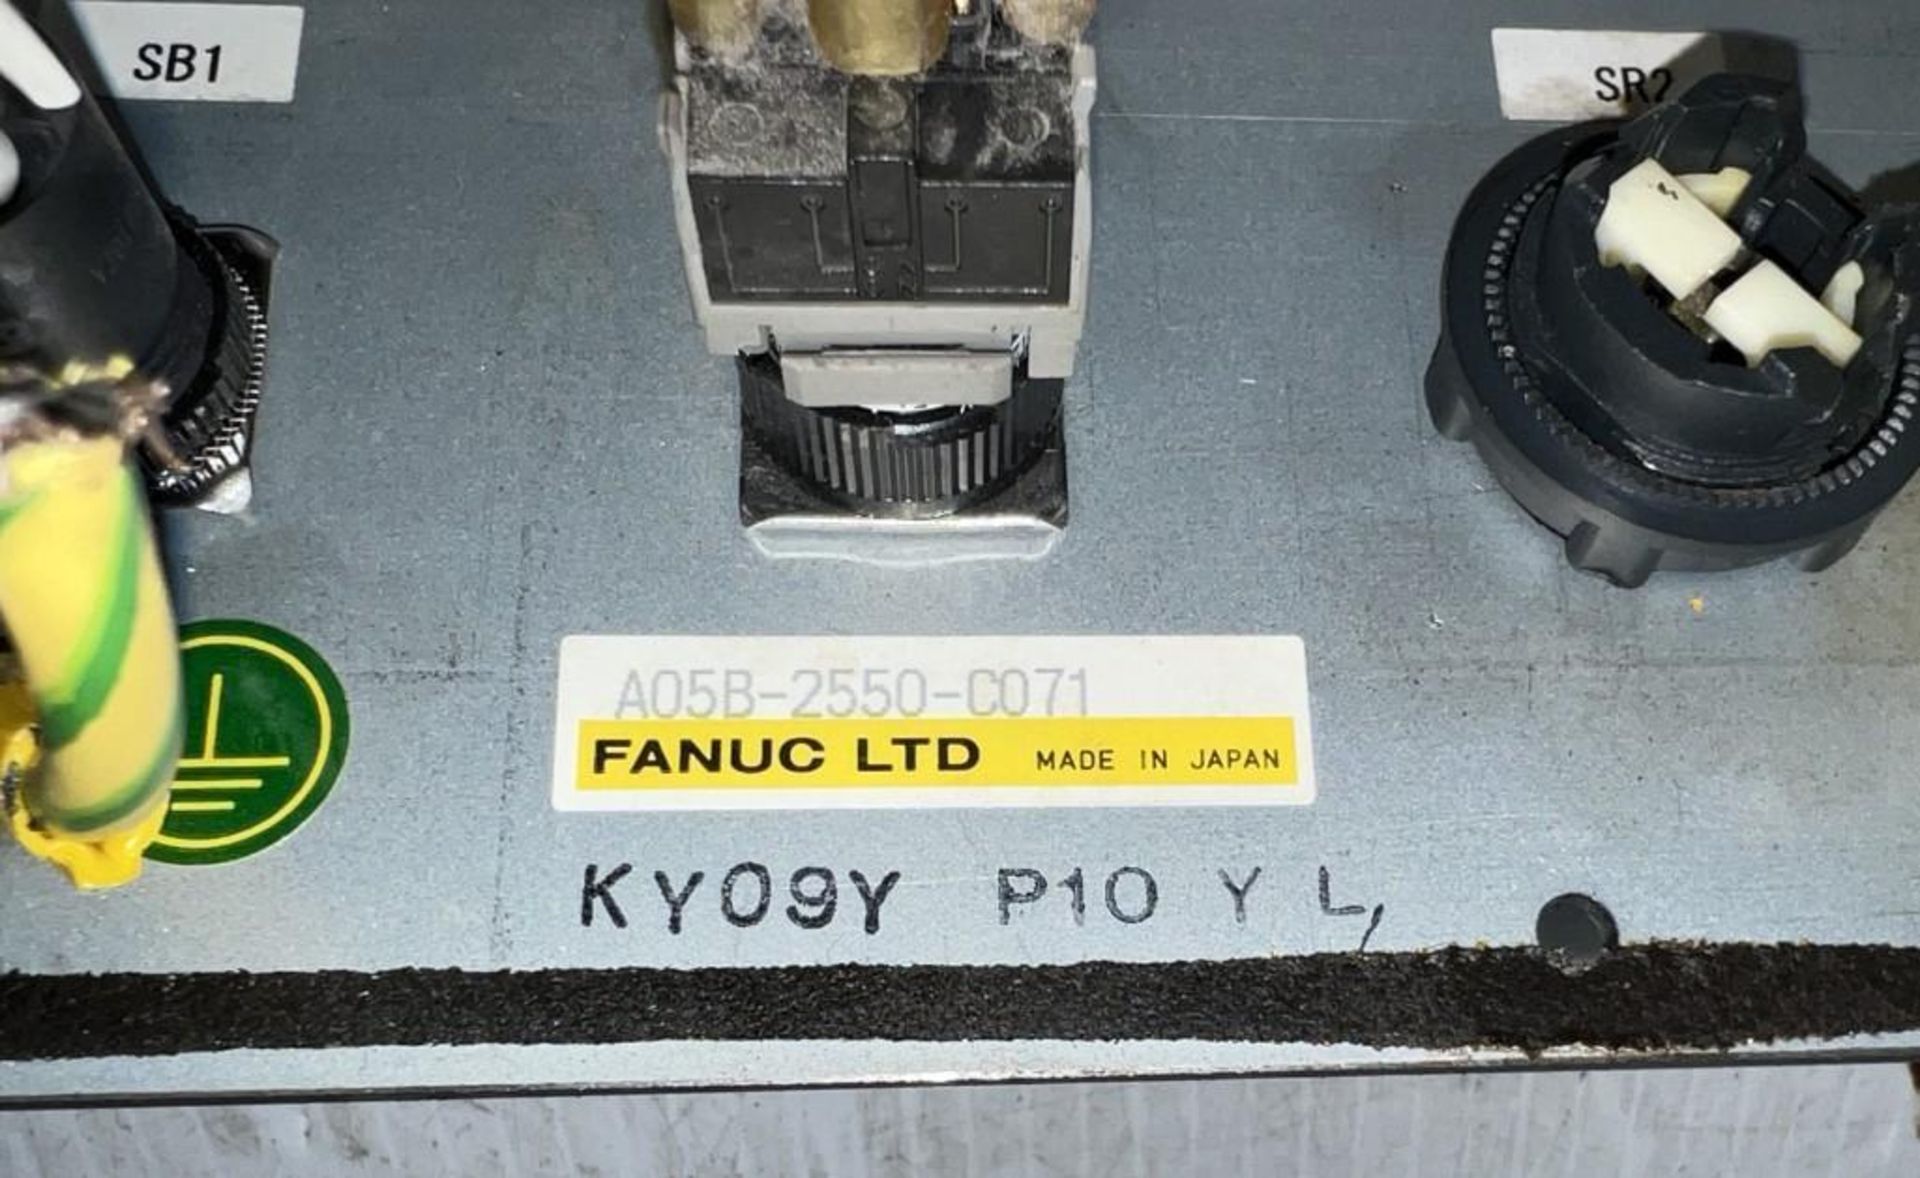 Lot of Fanuc Robot Items - Image 8 of 8